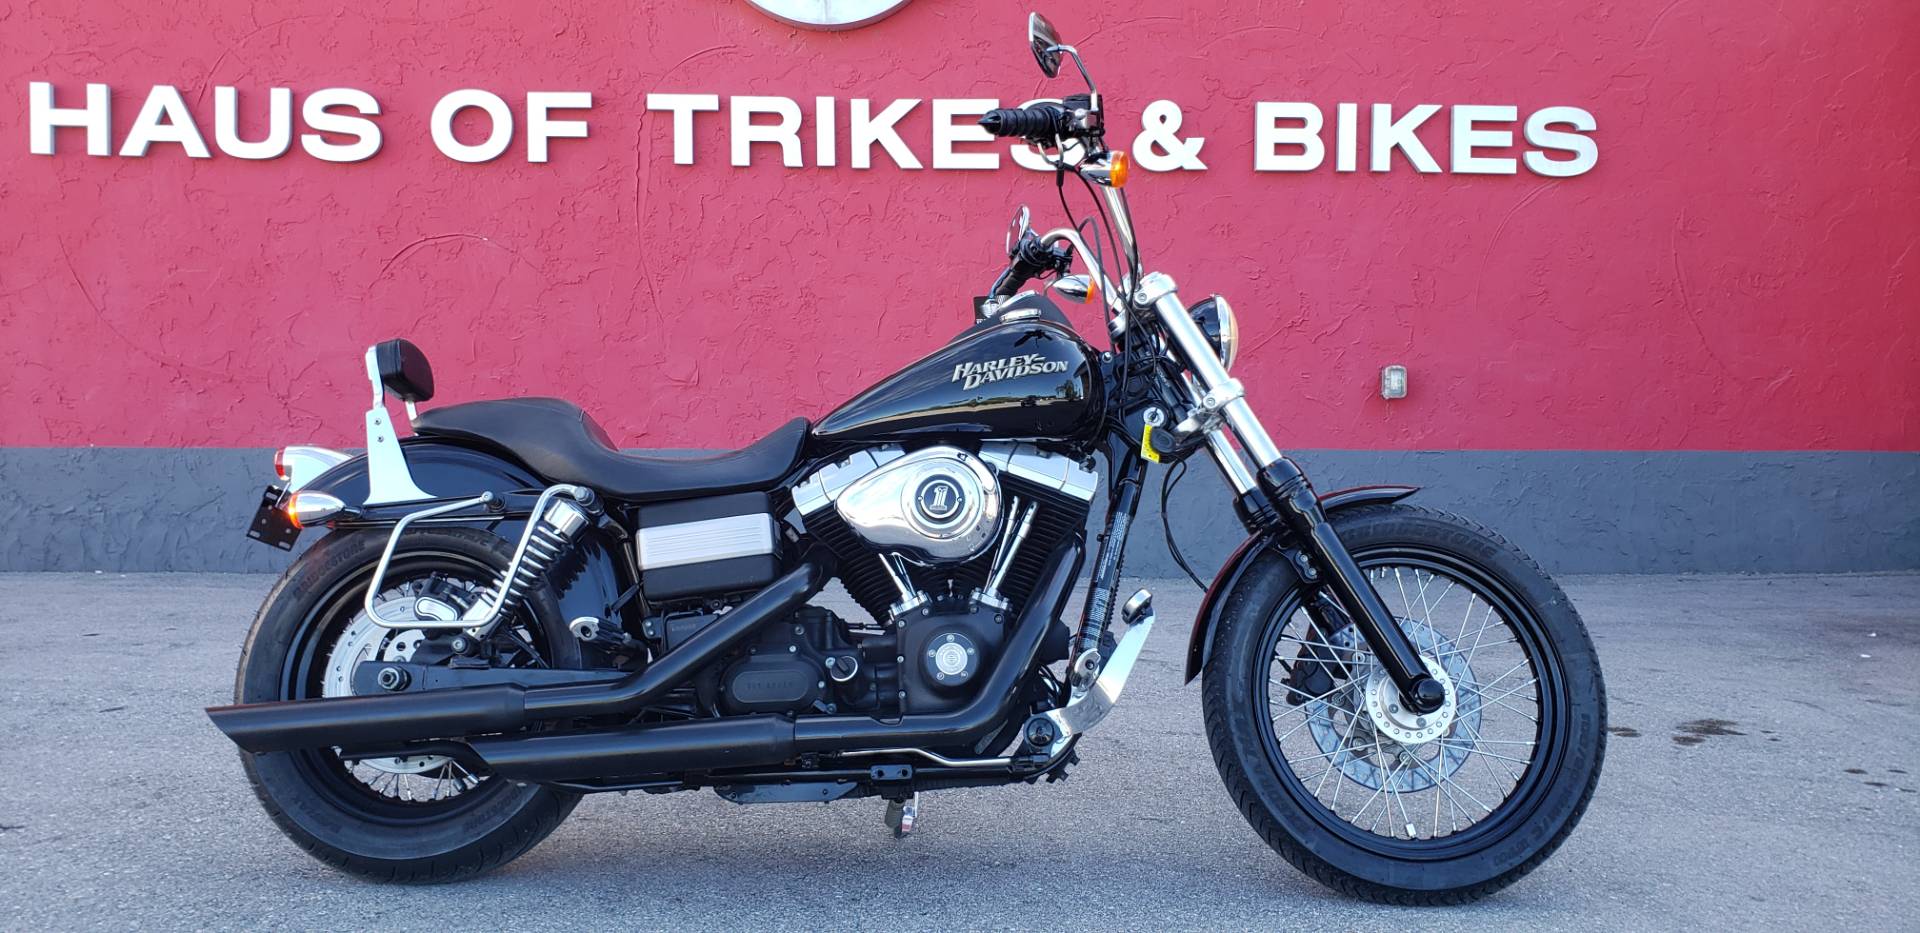 Used 2012 Harley Davidson Dyna Street Bob Motorcycles In Fort Myers Fl Stock Number 322582